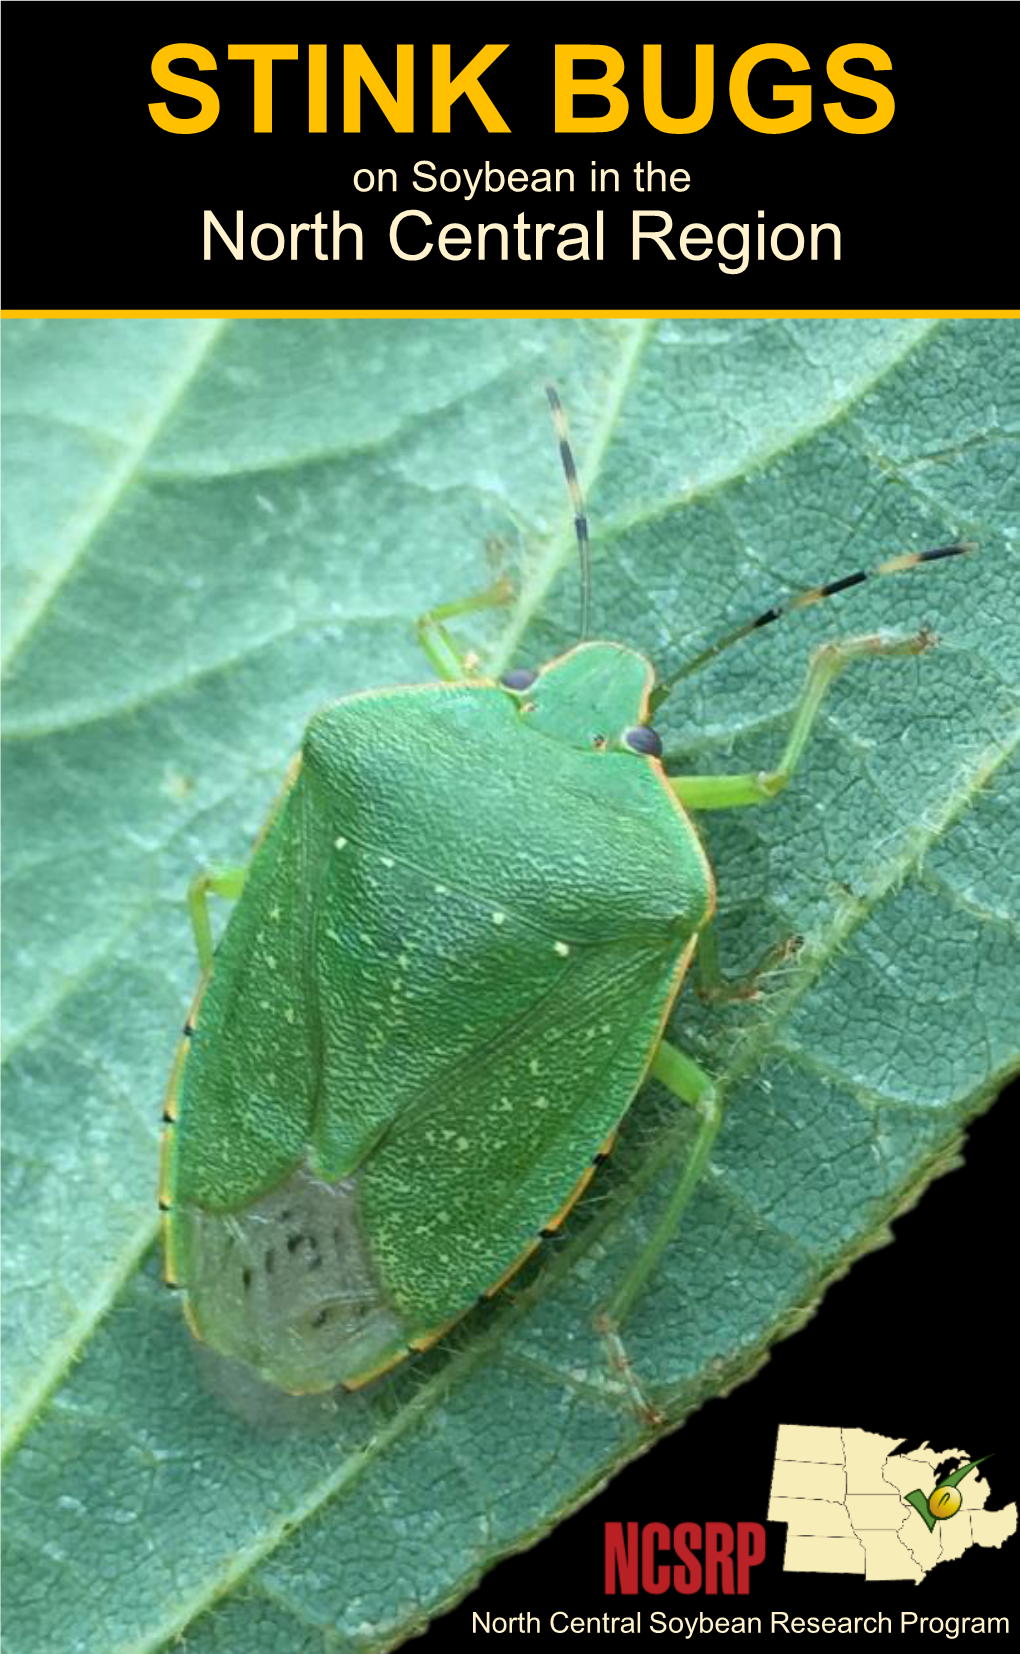 STINK BUGS on Soybean in the North Central Region